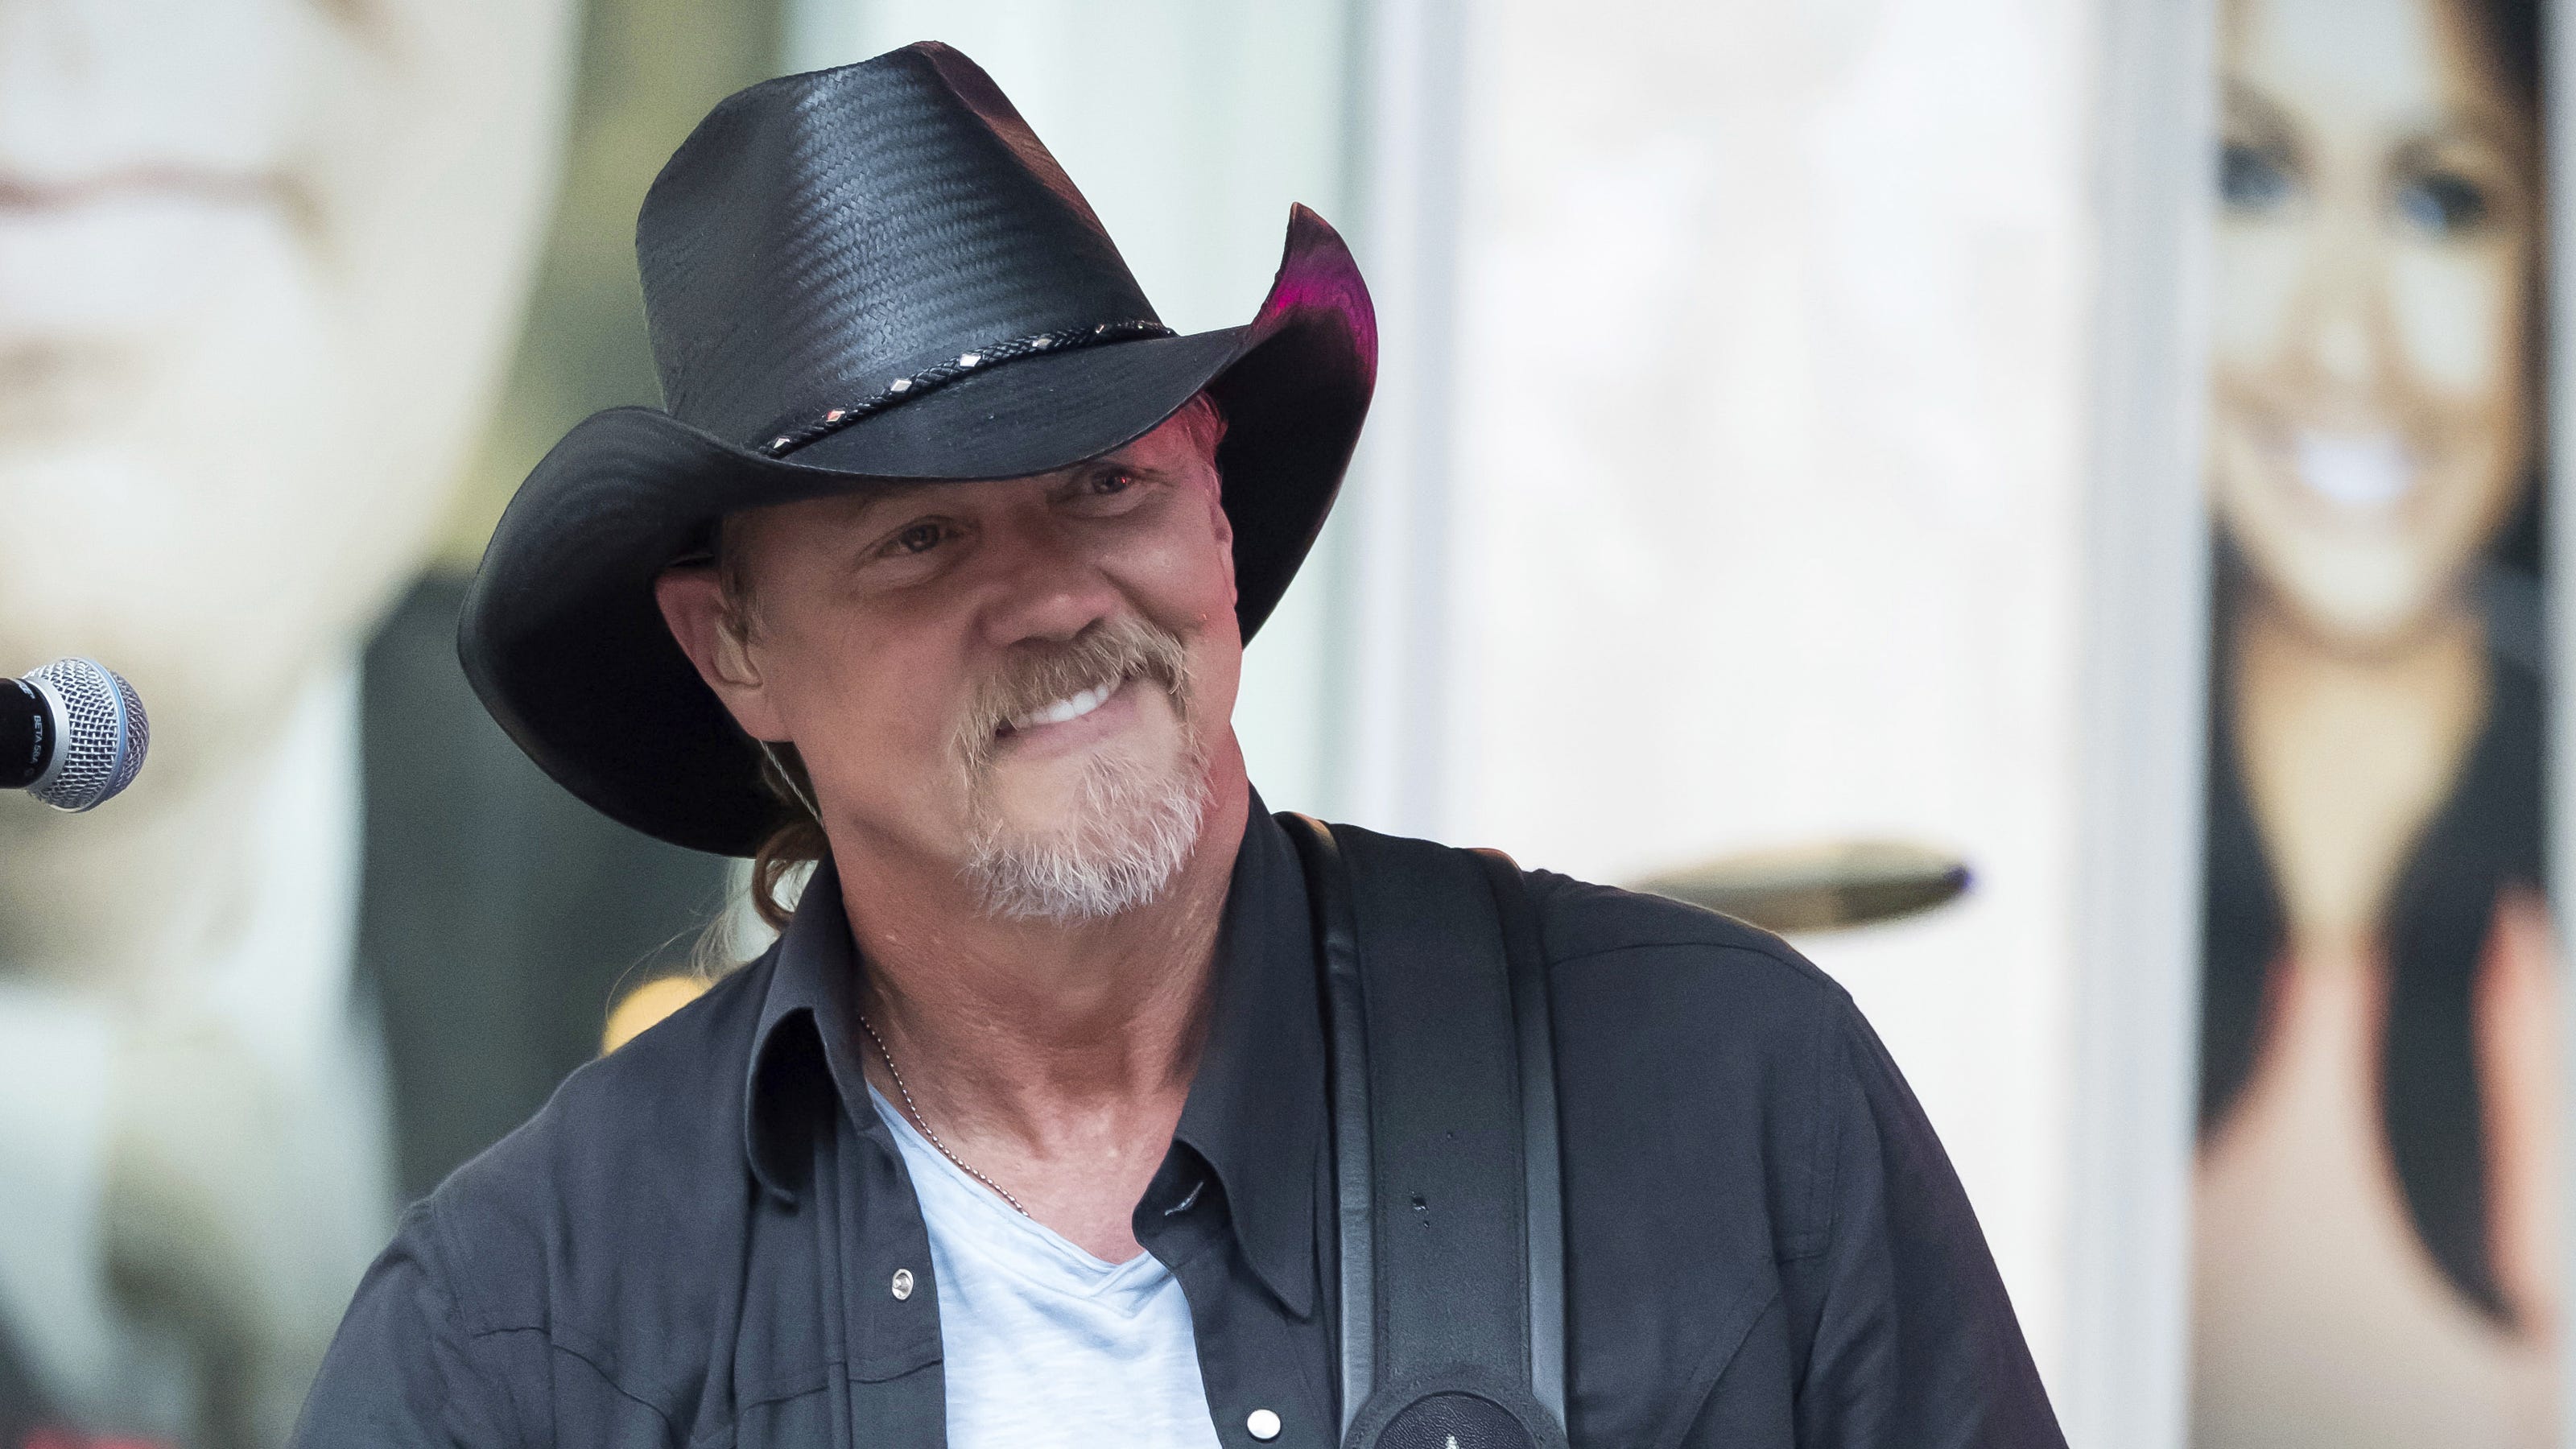 Trace Adkins debuts rowdy new song, 'Just the Way We Do It' Interview